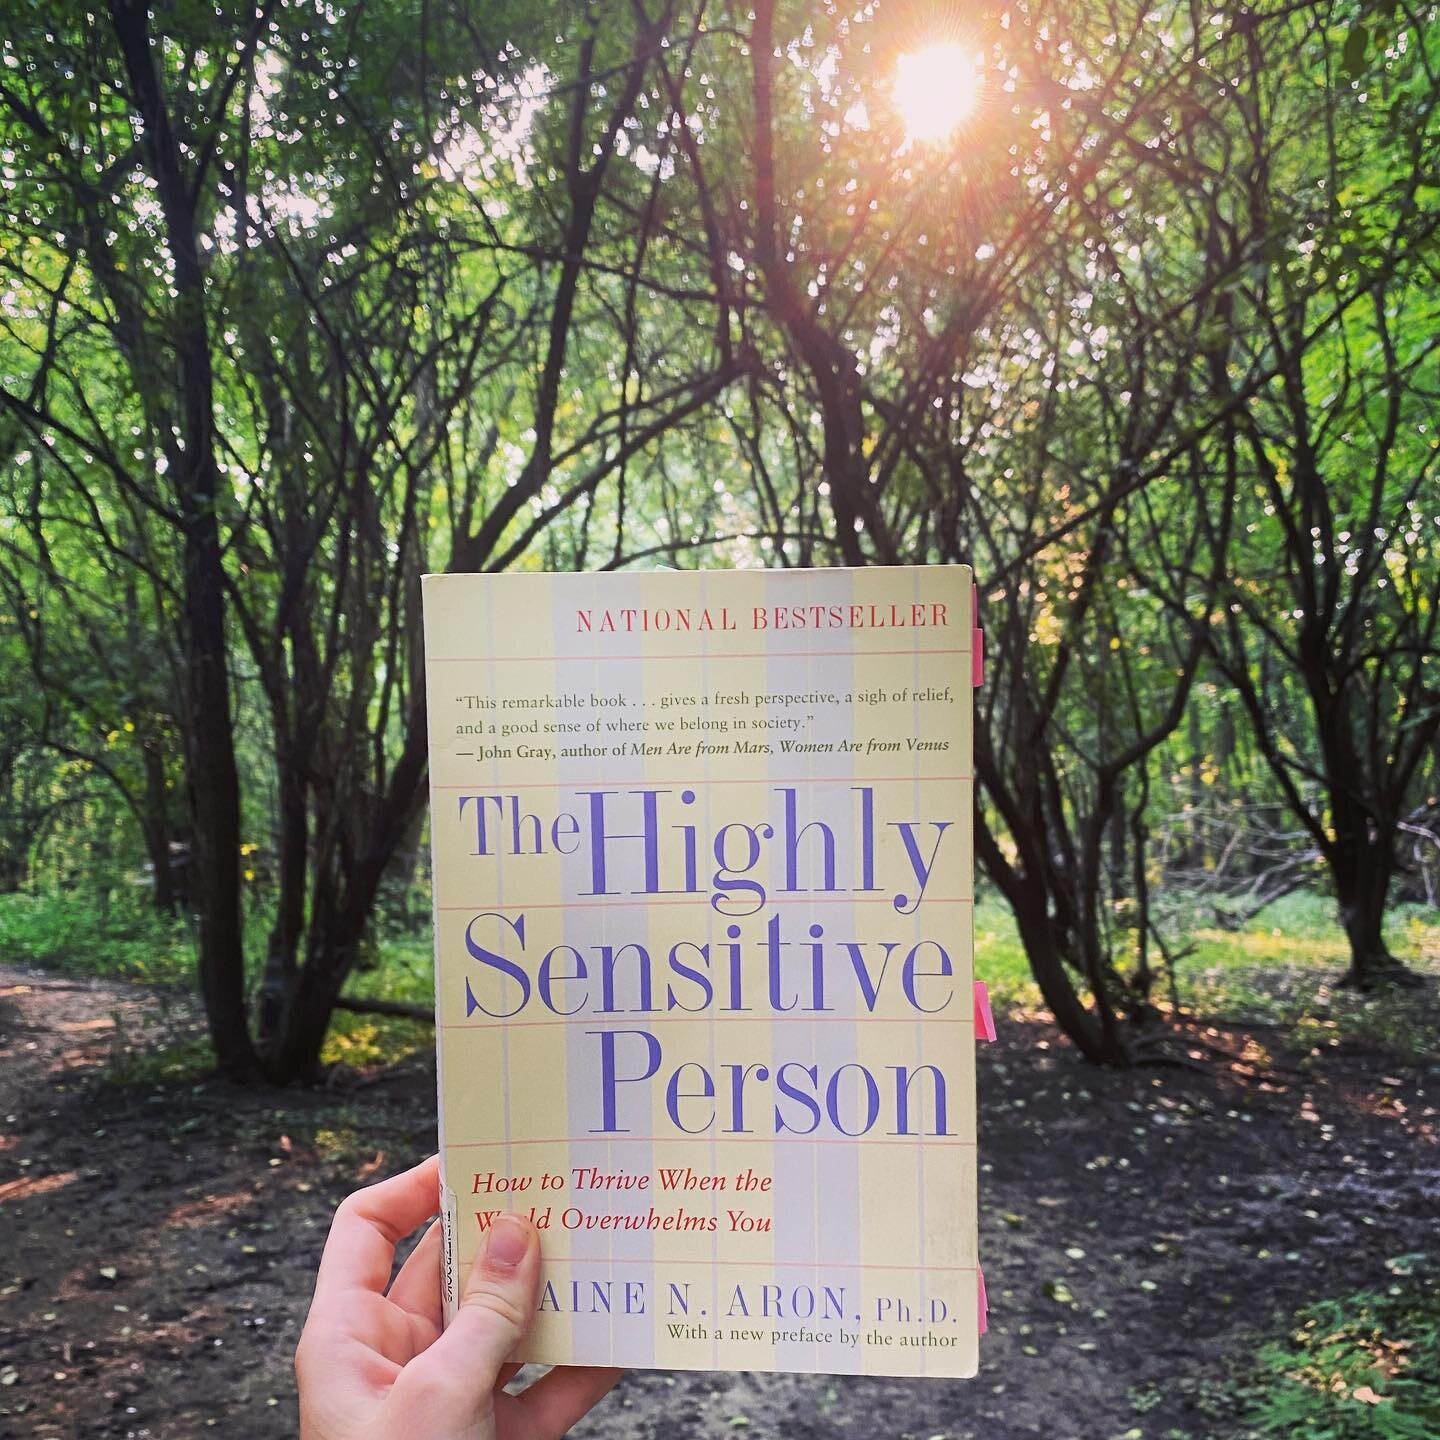 NEW PODCAST NOW LIVE 🐣 79. Book Talk: The Highly Sensitive Person | Part 4 (Deep Healing, Medication, &amp; Our Greater Purpose) 🦋

We finally made it to the FINALE of our book talk series: The Highly Sensitive Person by Elaine Aron 🌳 During this 